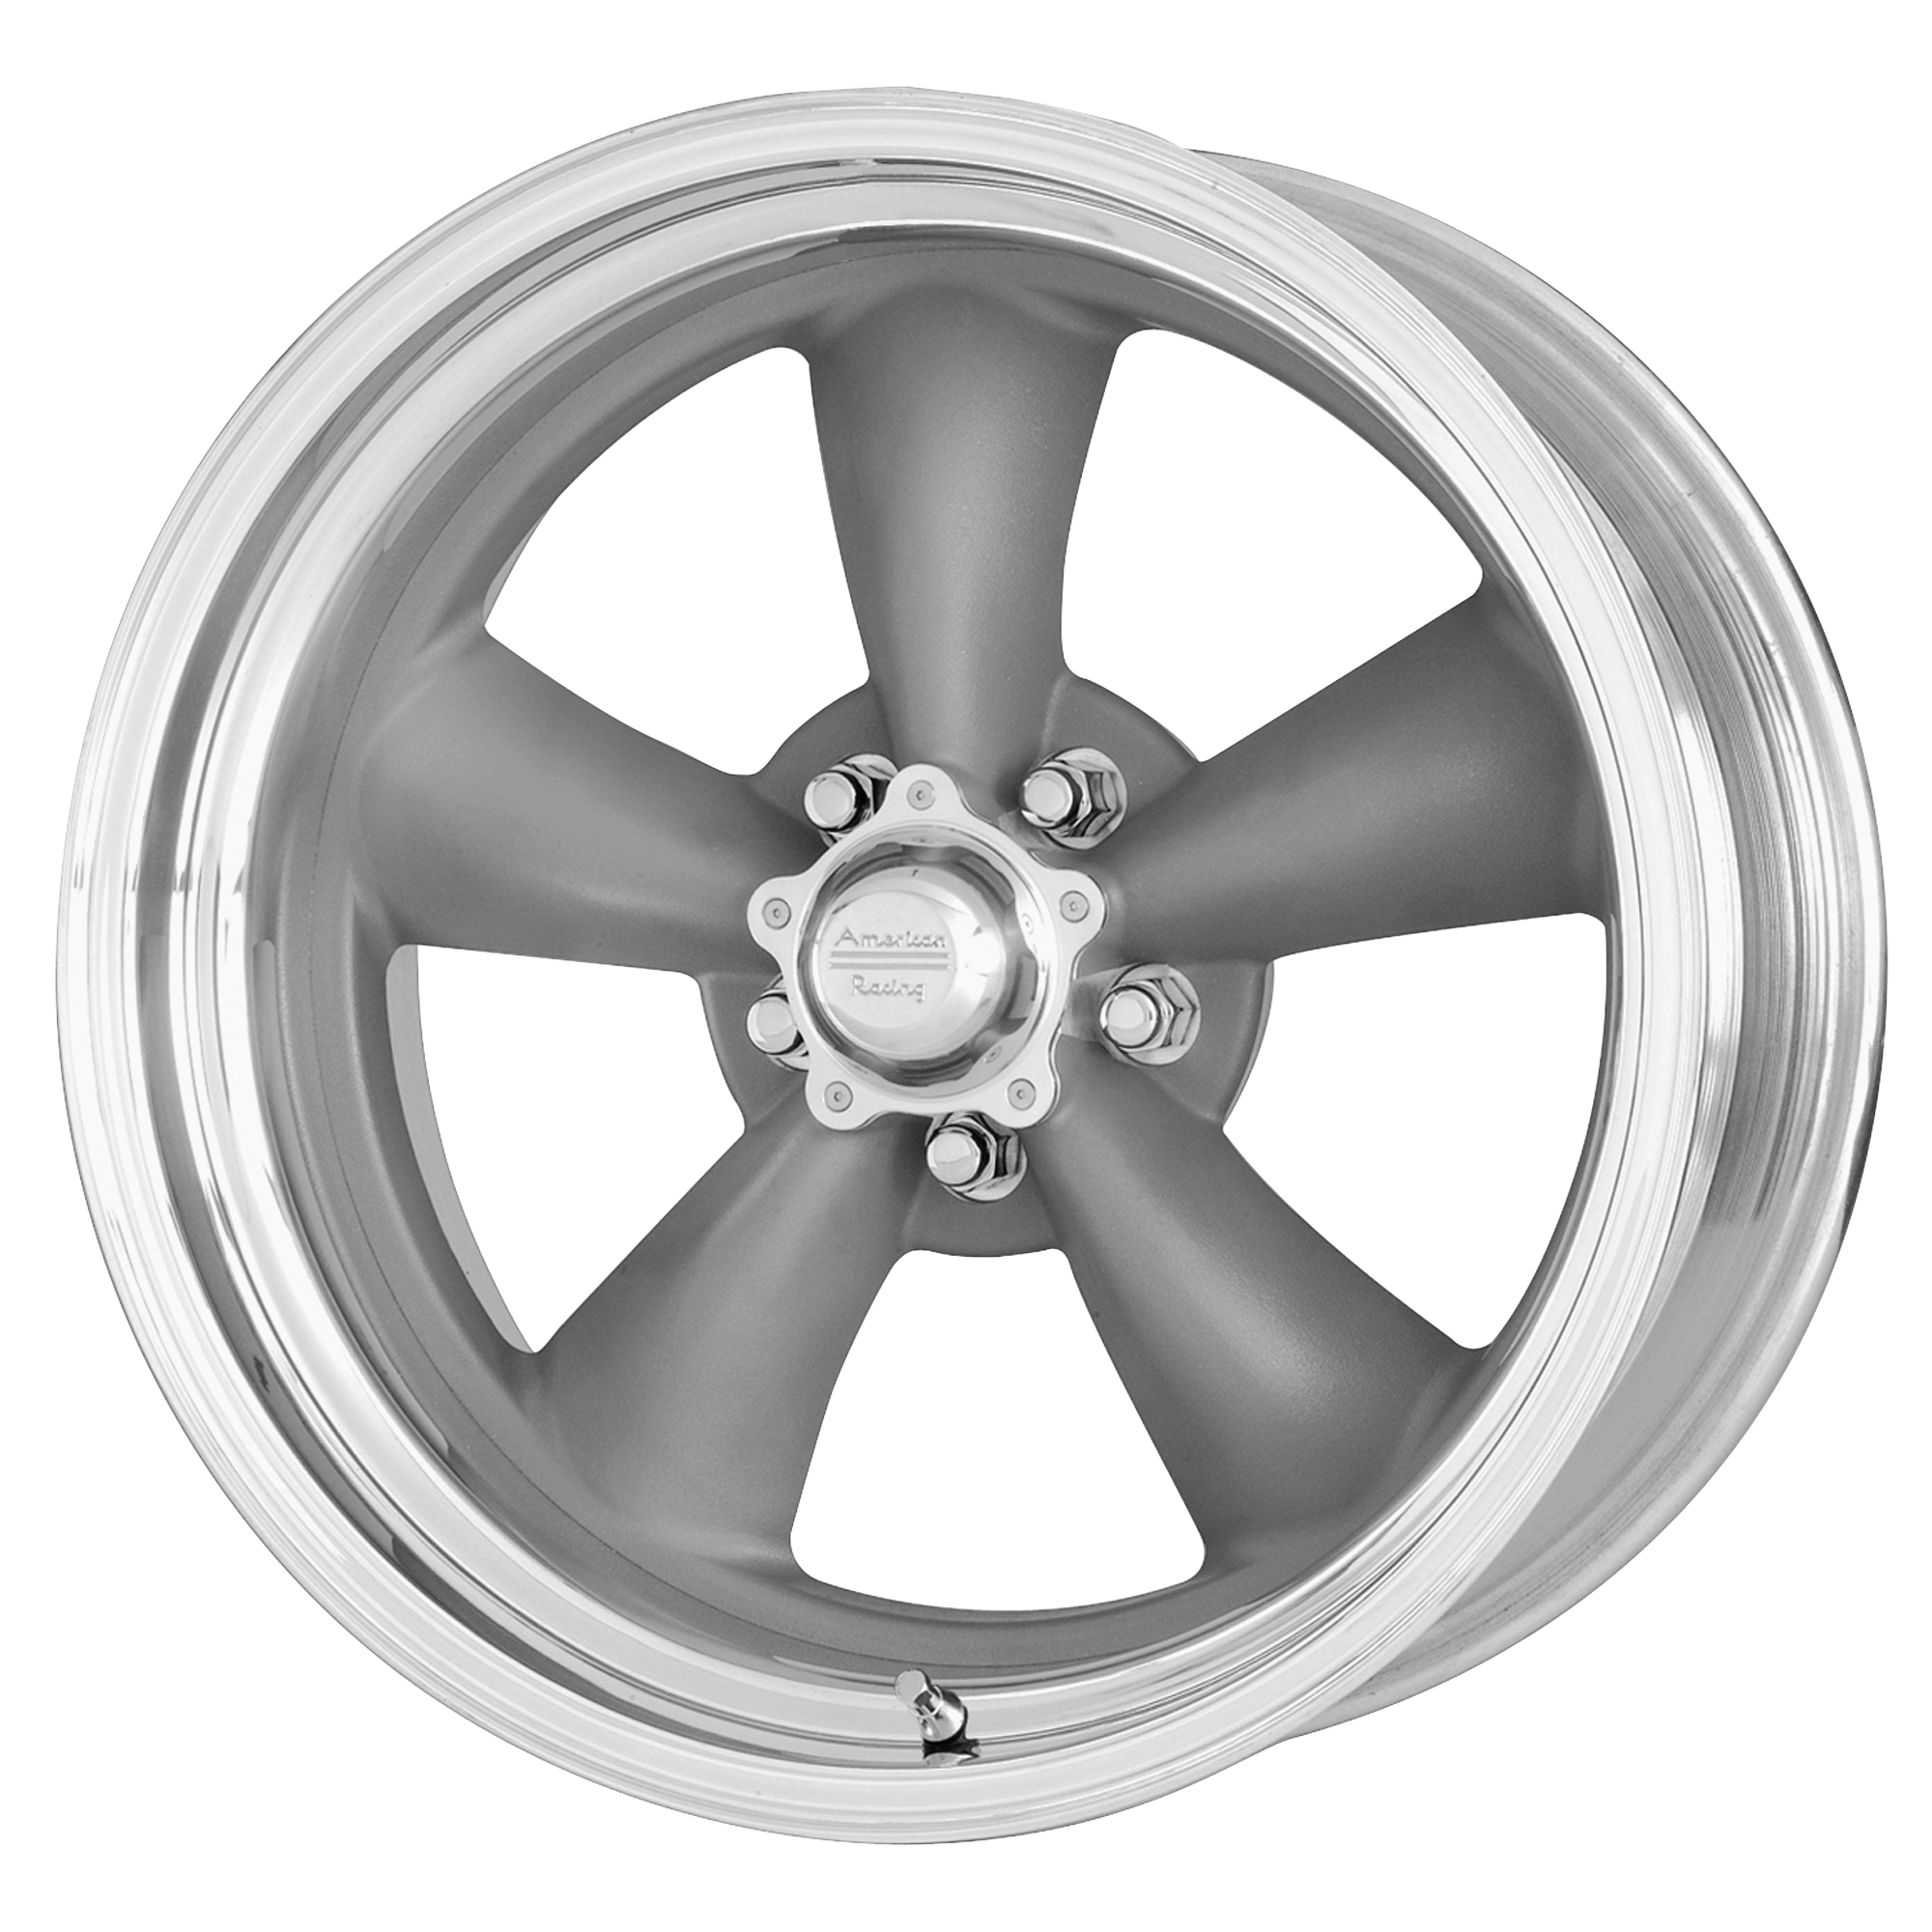 CLASSIC TORQ THRUST II ONE PIECE 15x7 5x120.65 MAG GRAY W/ MACHINED LIP (-6 mm) - Tires and Engine Performance